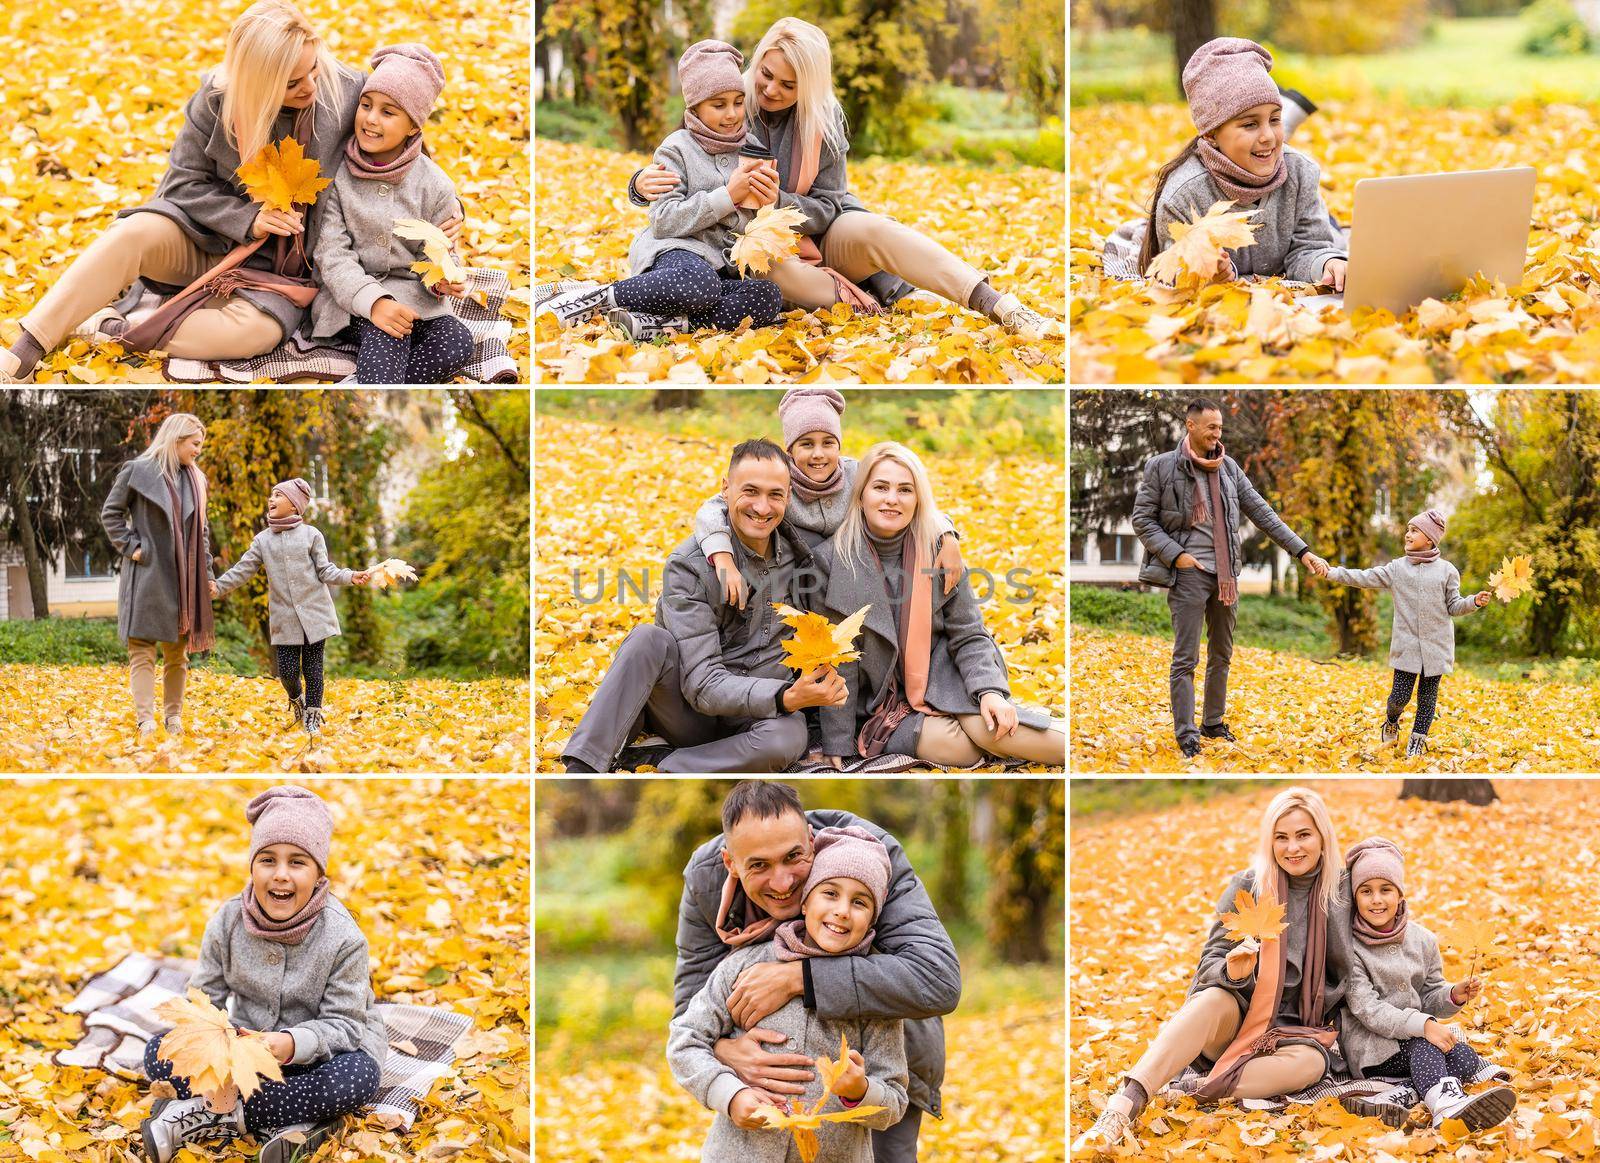 Collage of photos with happy family in autumn park by Andelov13